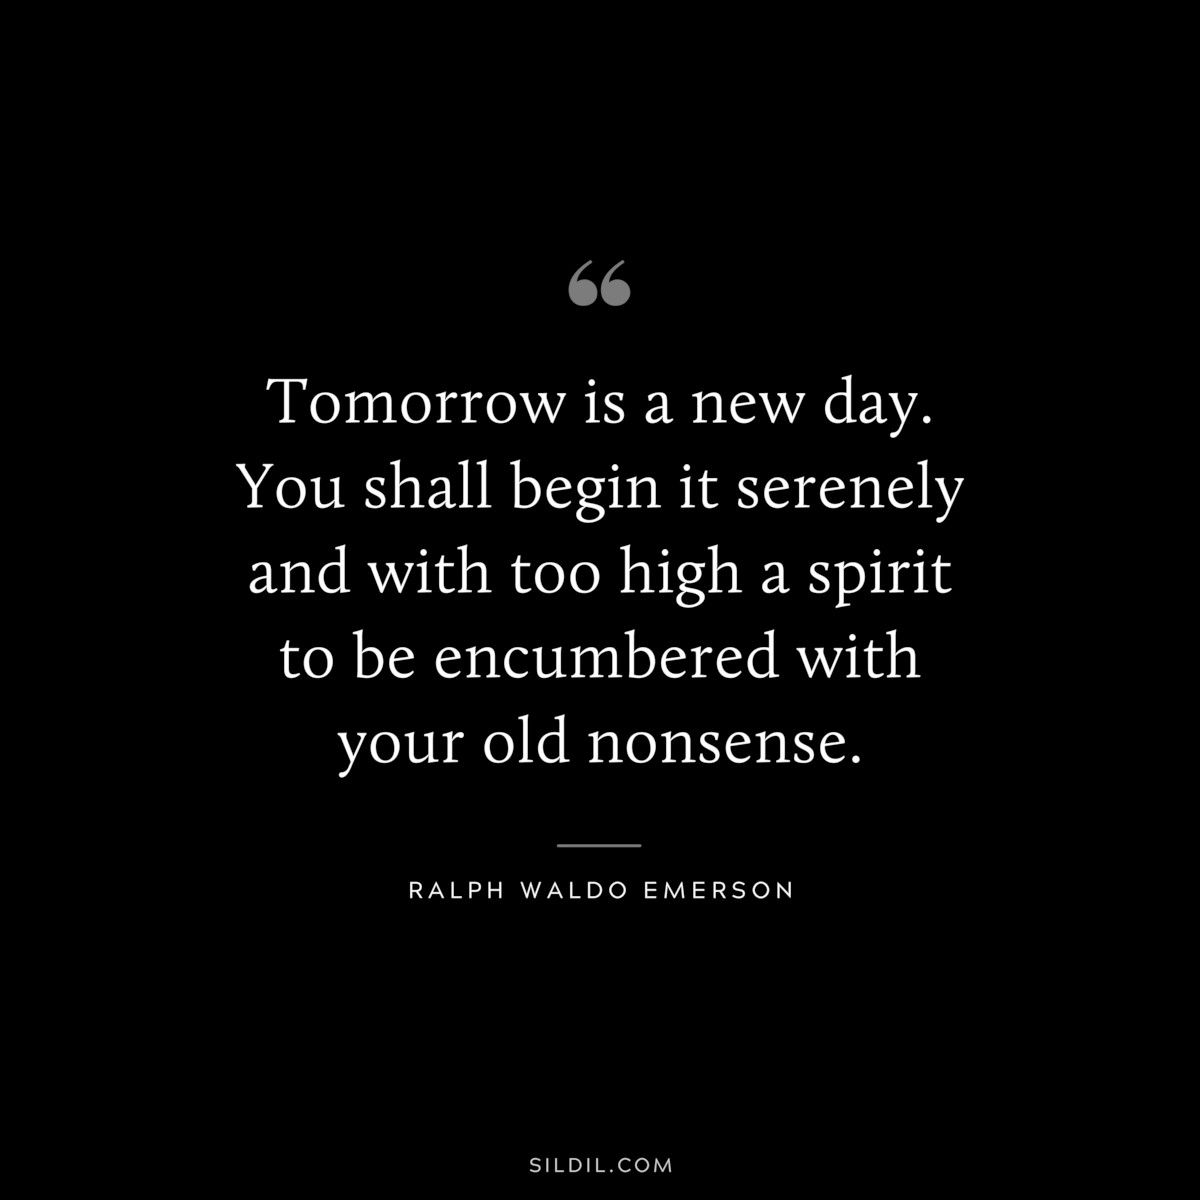 Tomorrow is a new day. You shall begin it serenely and with too high a spirit to be encumbered with your old nonsense. — Ralph Waldo Emerson